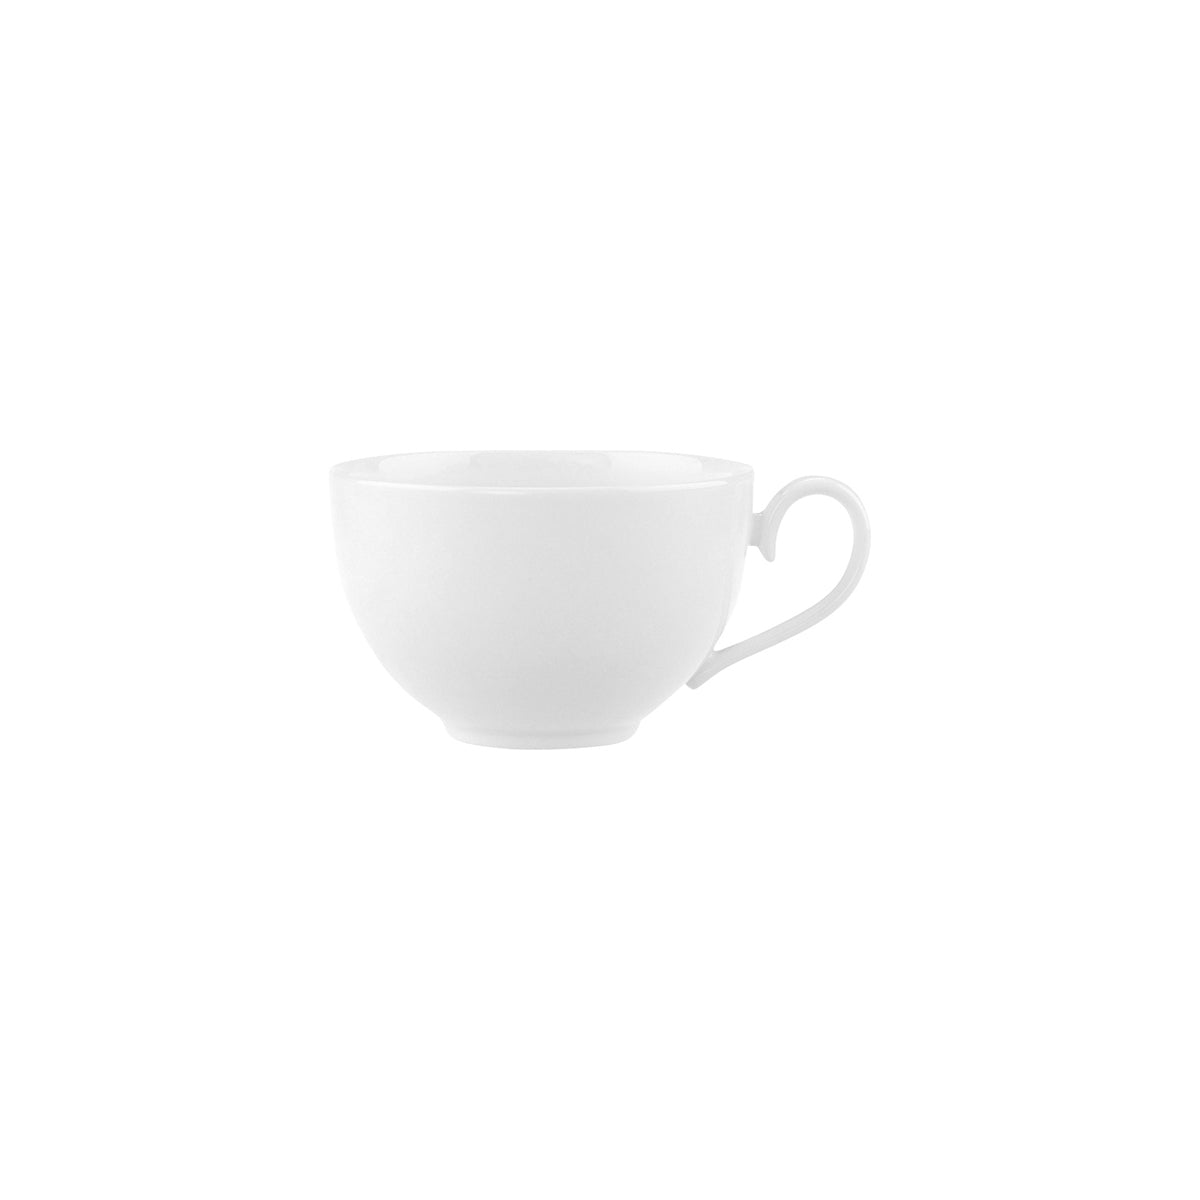 VB16-3272-1240 Villeroy And Boch Villeroy And Boch Stella Hotel White Cup No. 1 400ml Tomkin Australia Hospitality Supplies